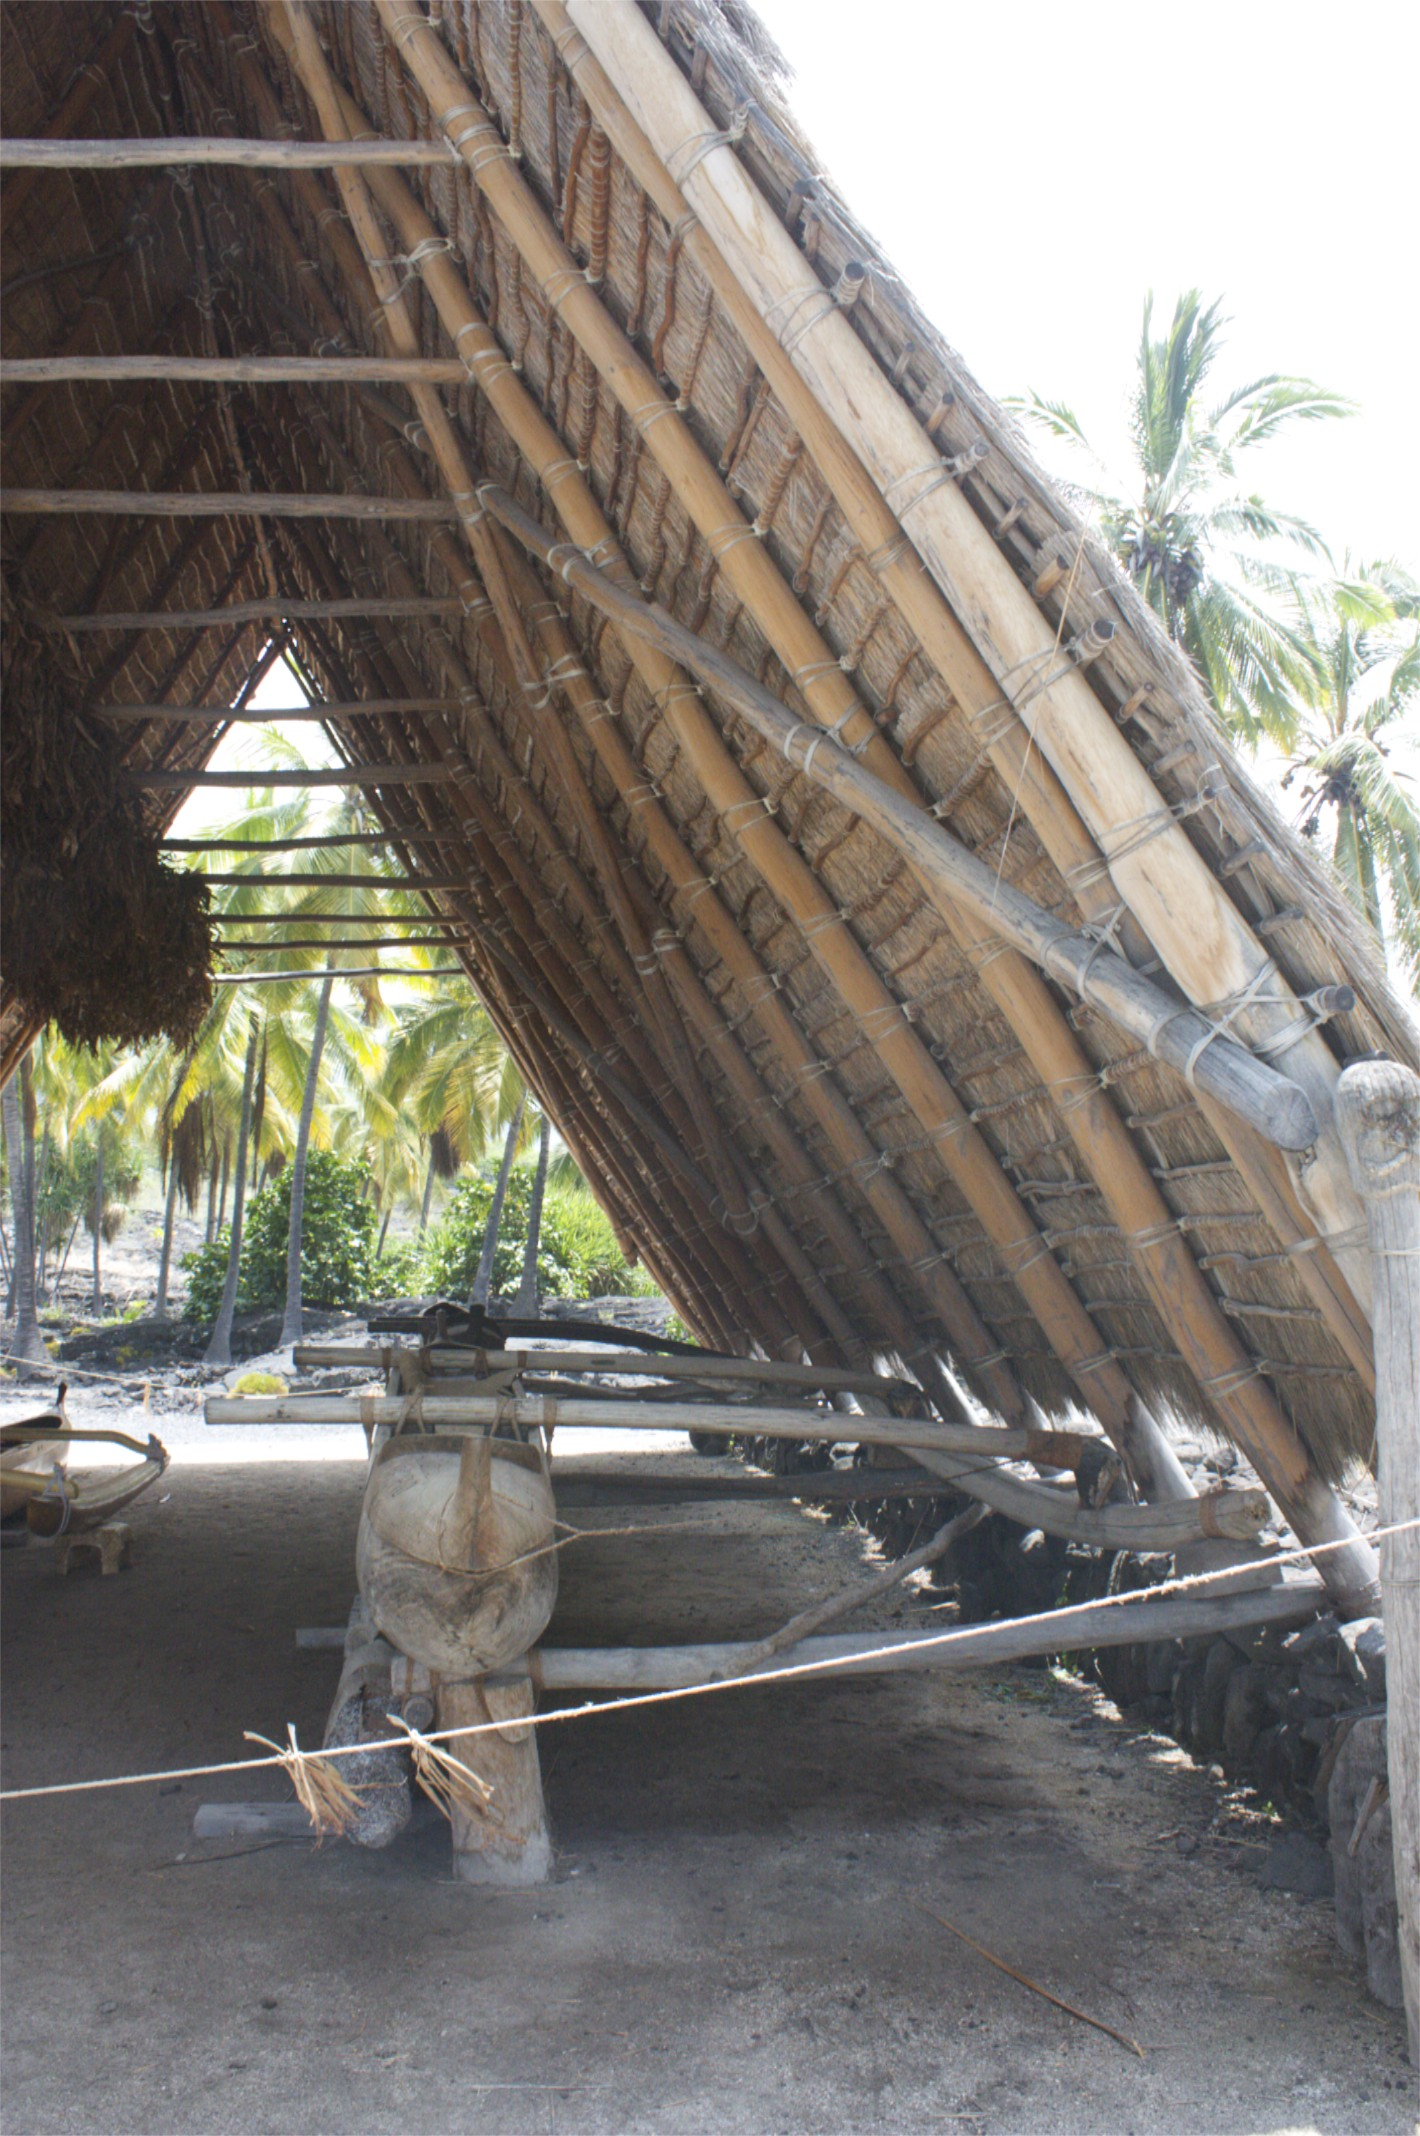 two men are working underneath a wooden structure